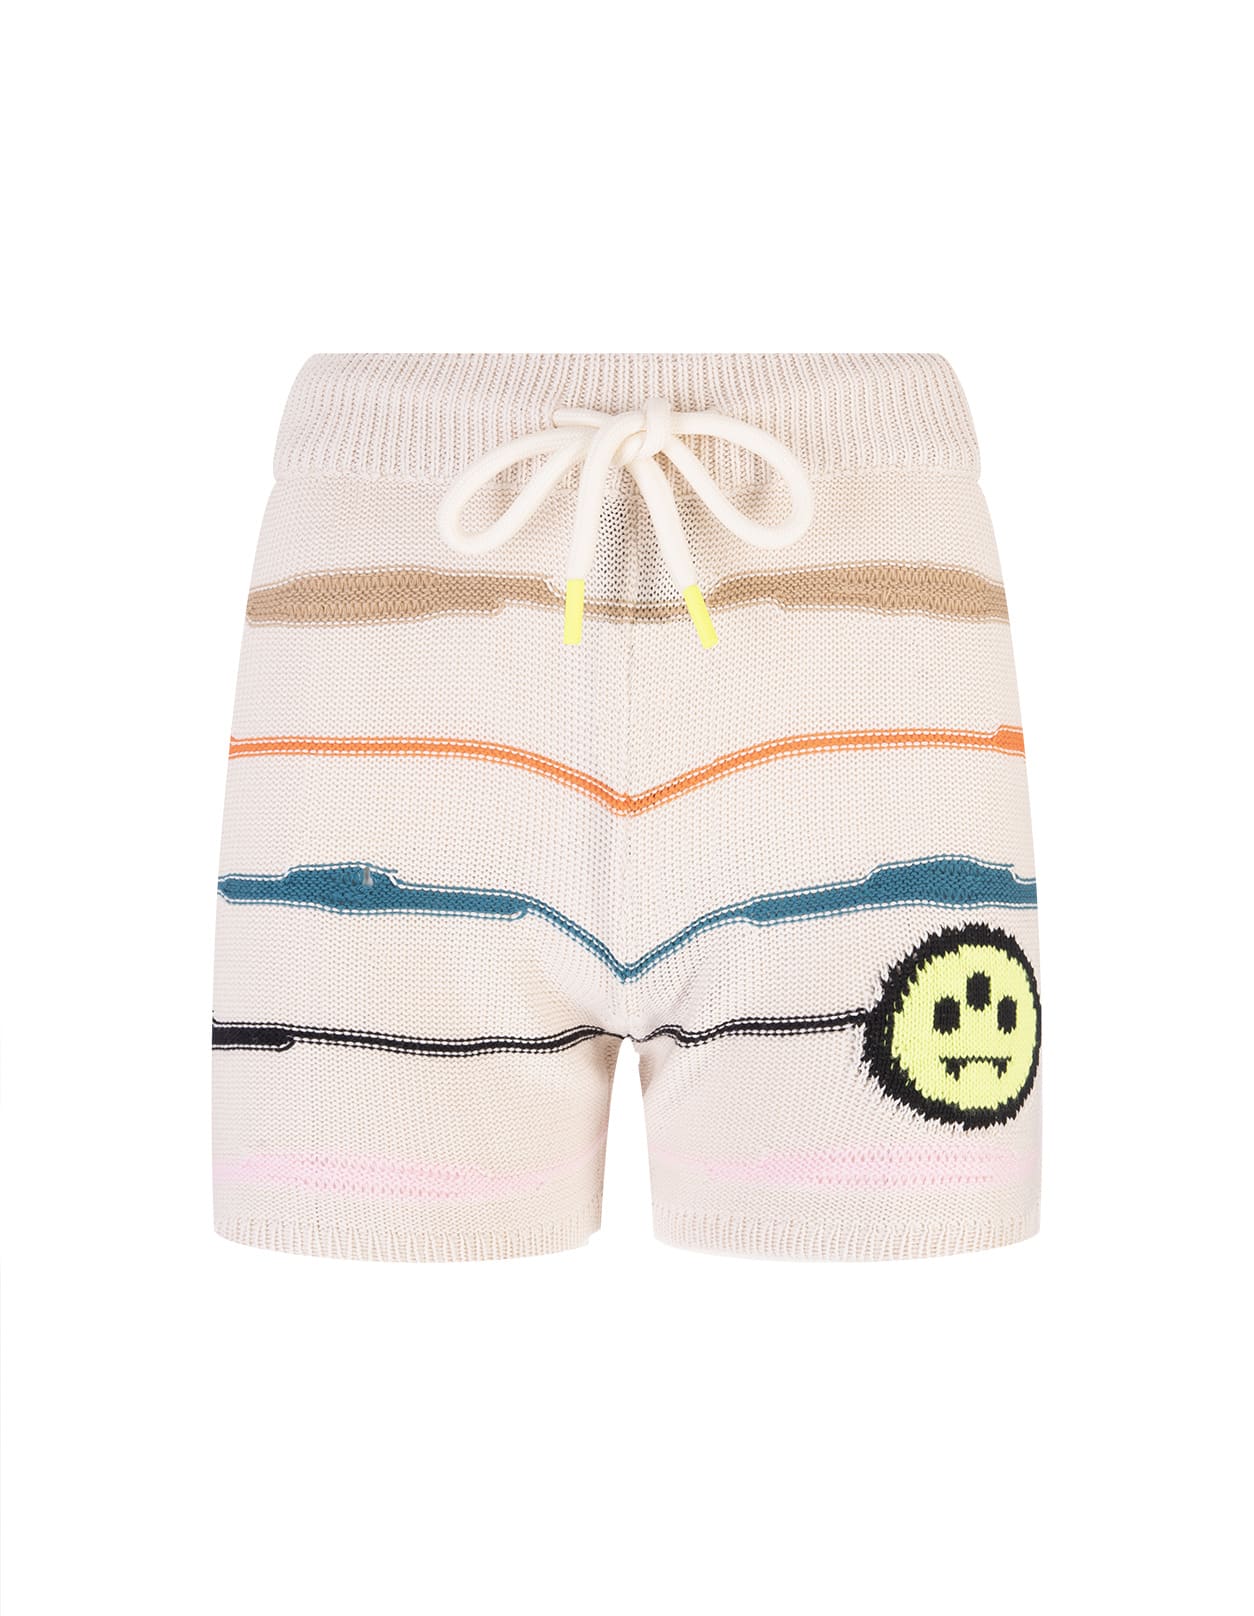 BARROW BUTTER SHORTS WITH LOGO AND MULTICOLOURED STRIPES